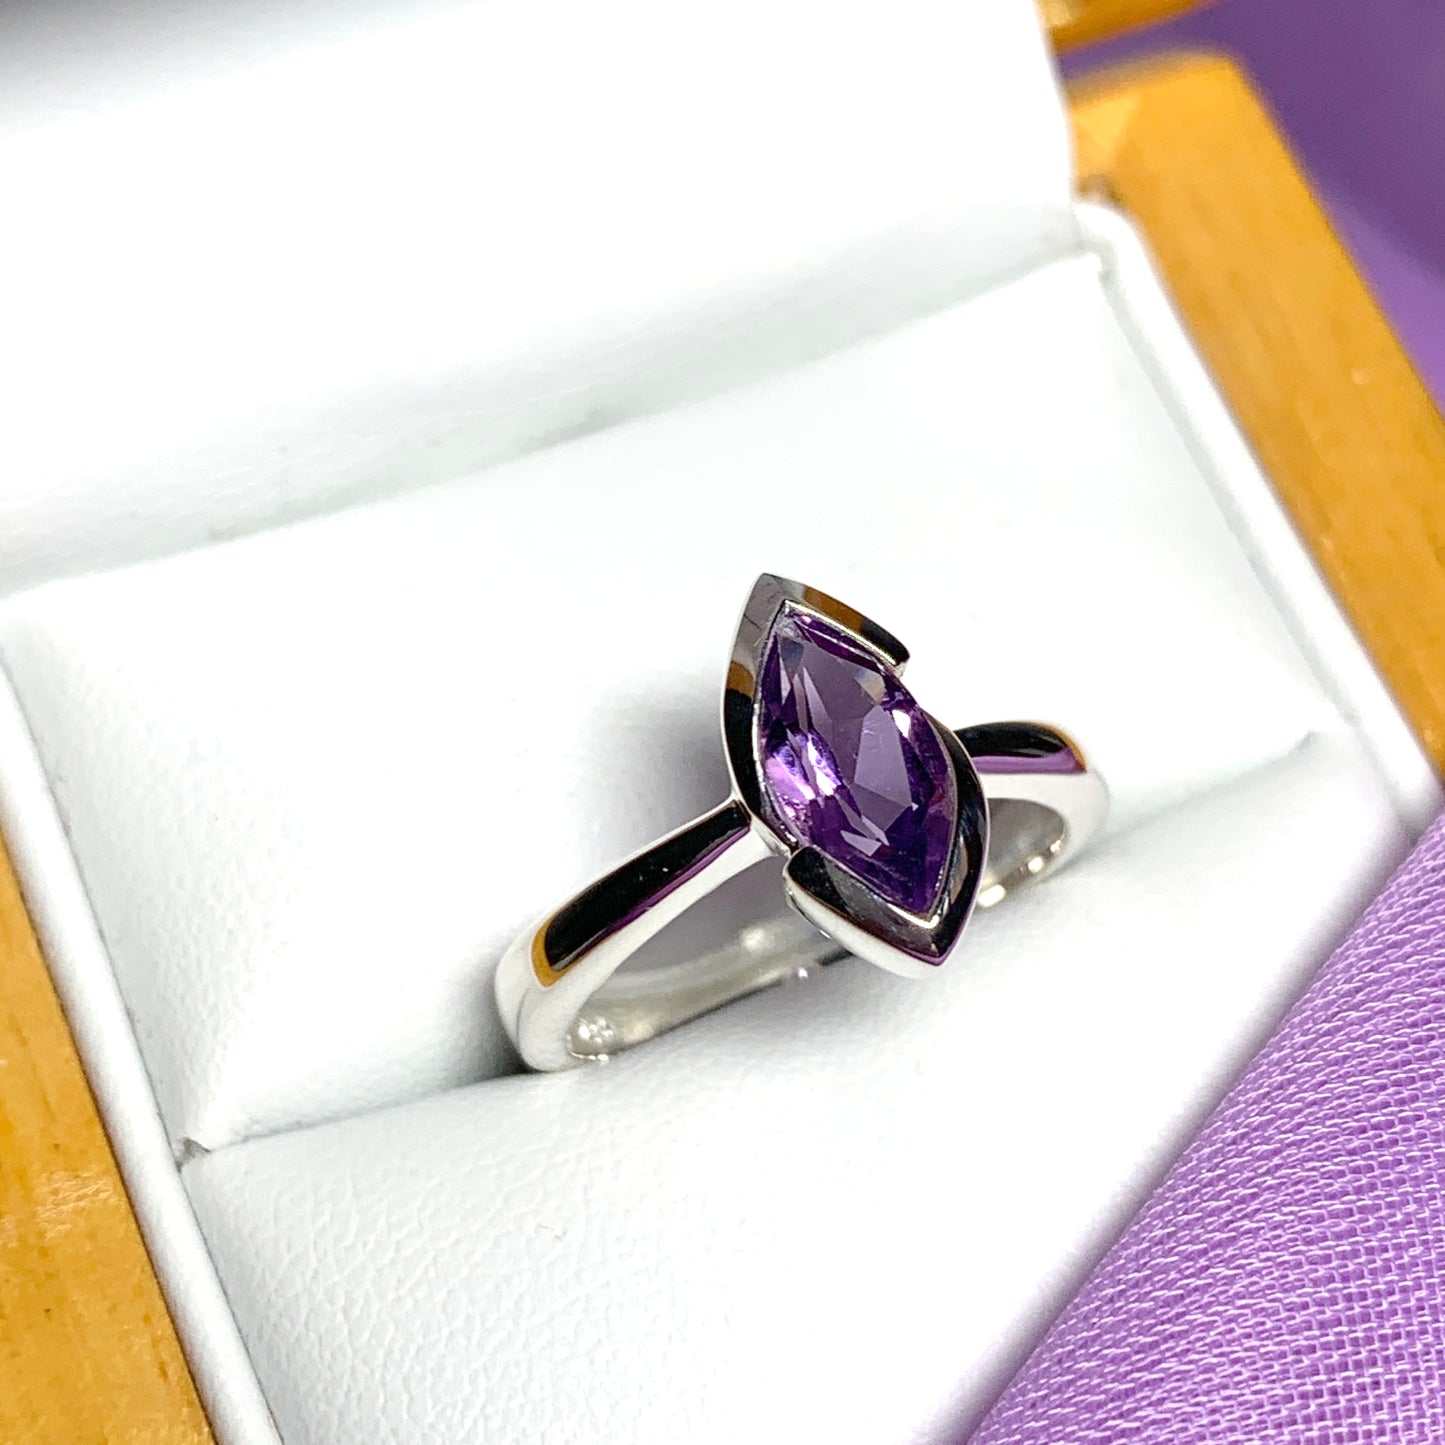 Marquise shaped amethyst sterling silver fancy dress cocktail ring